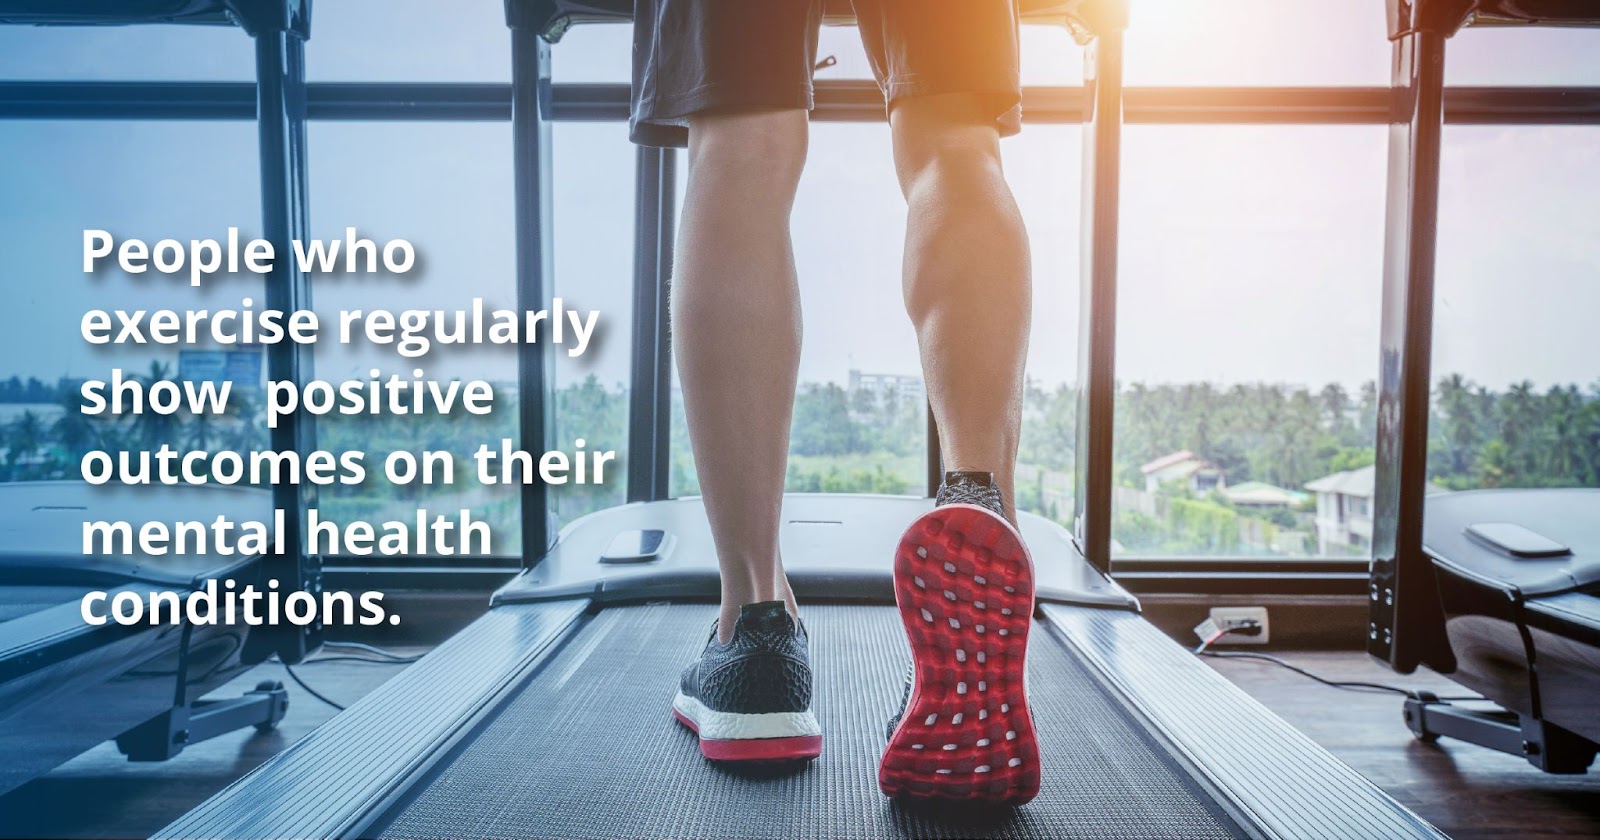 People who exercise regularly show positive outcomes on their mental health conditions